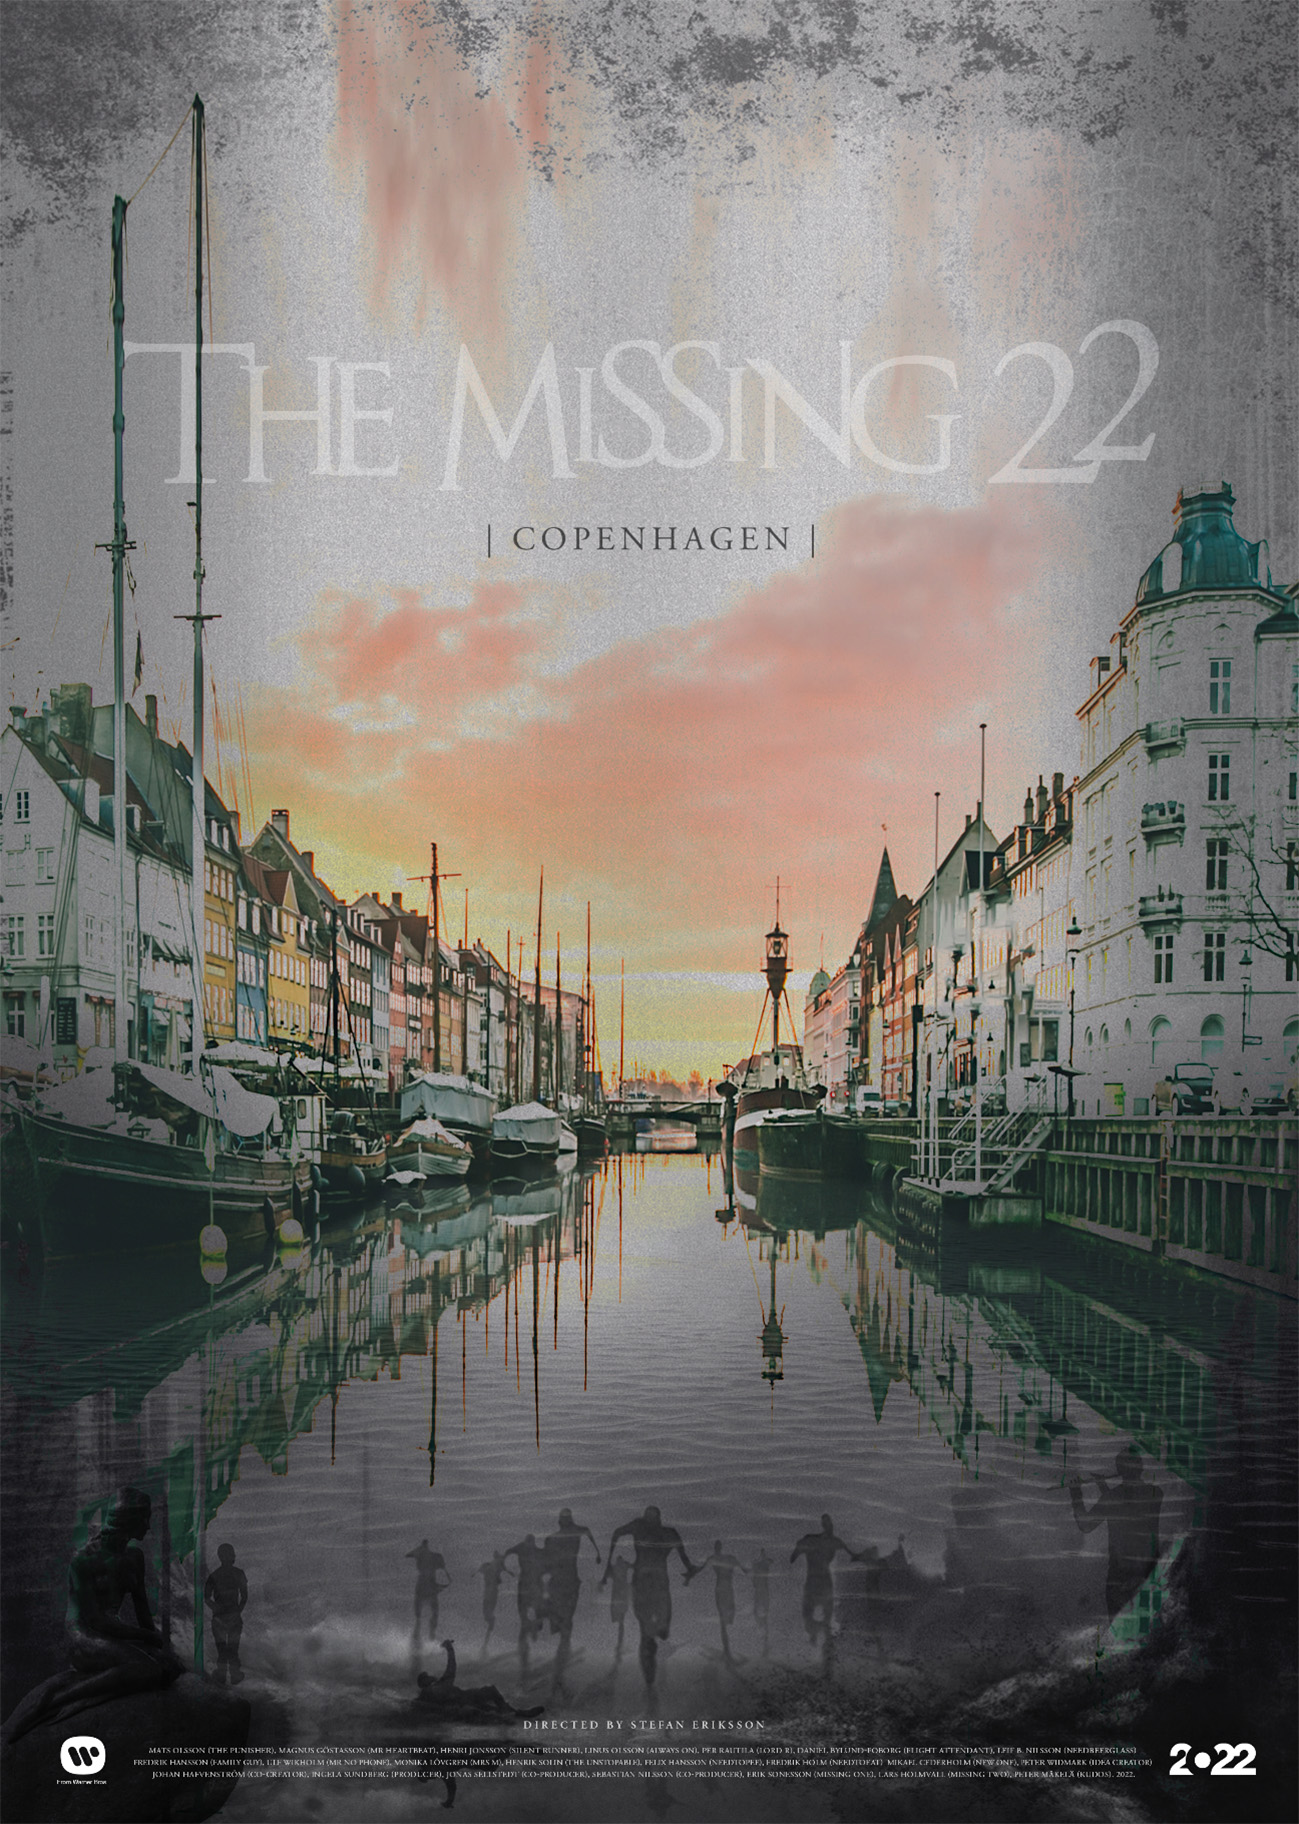 The Missing 22 poster WHY